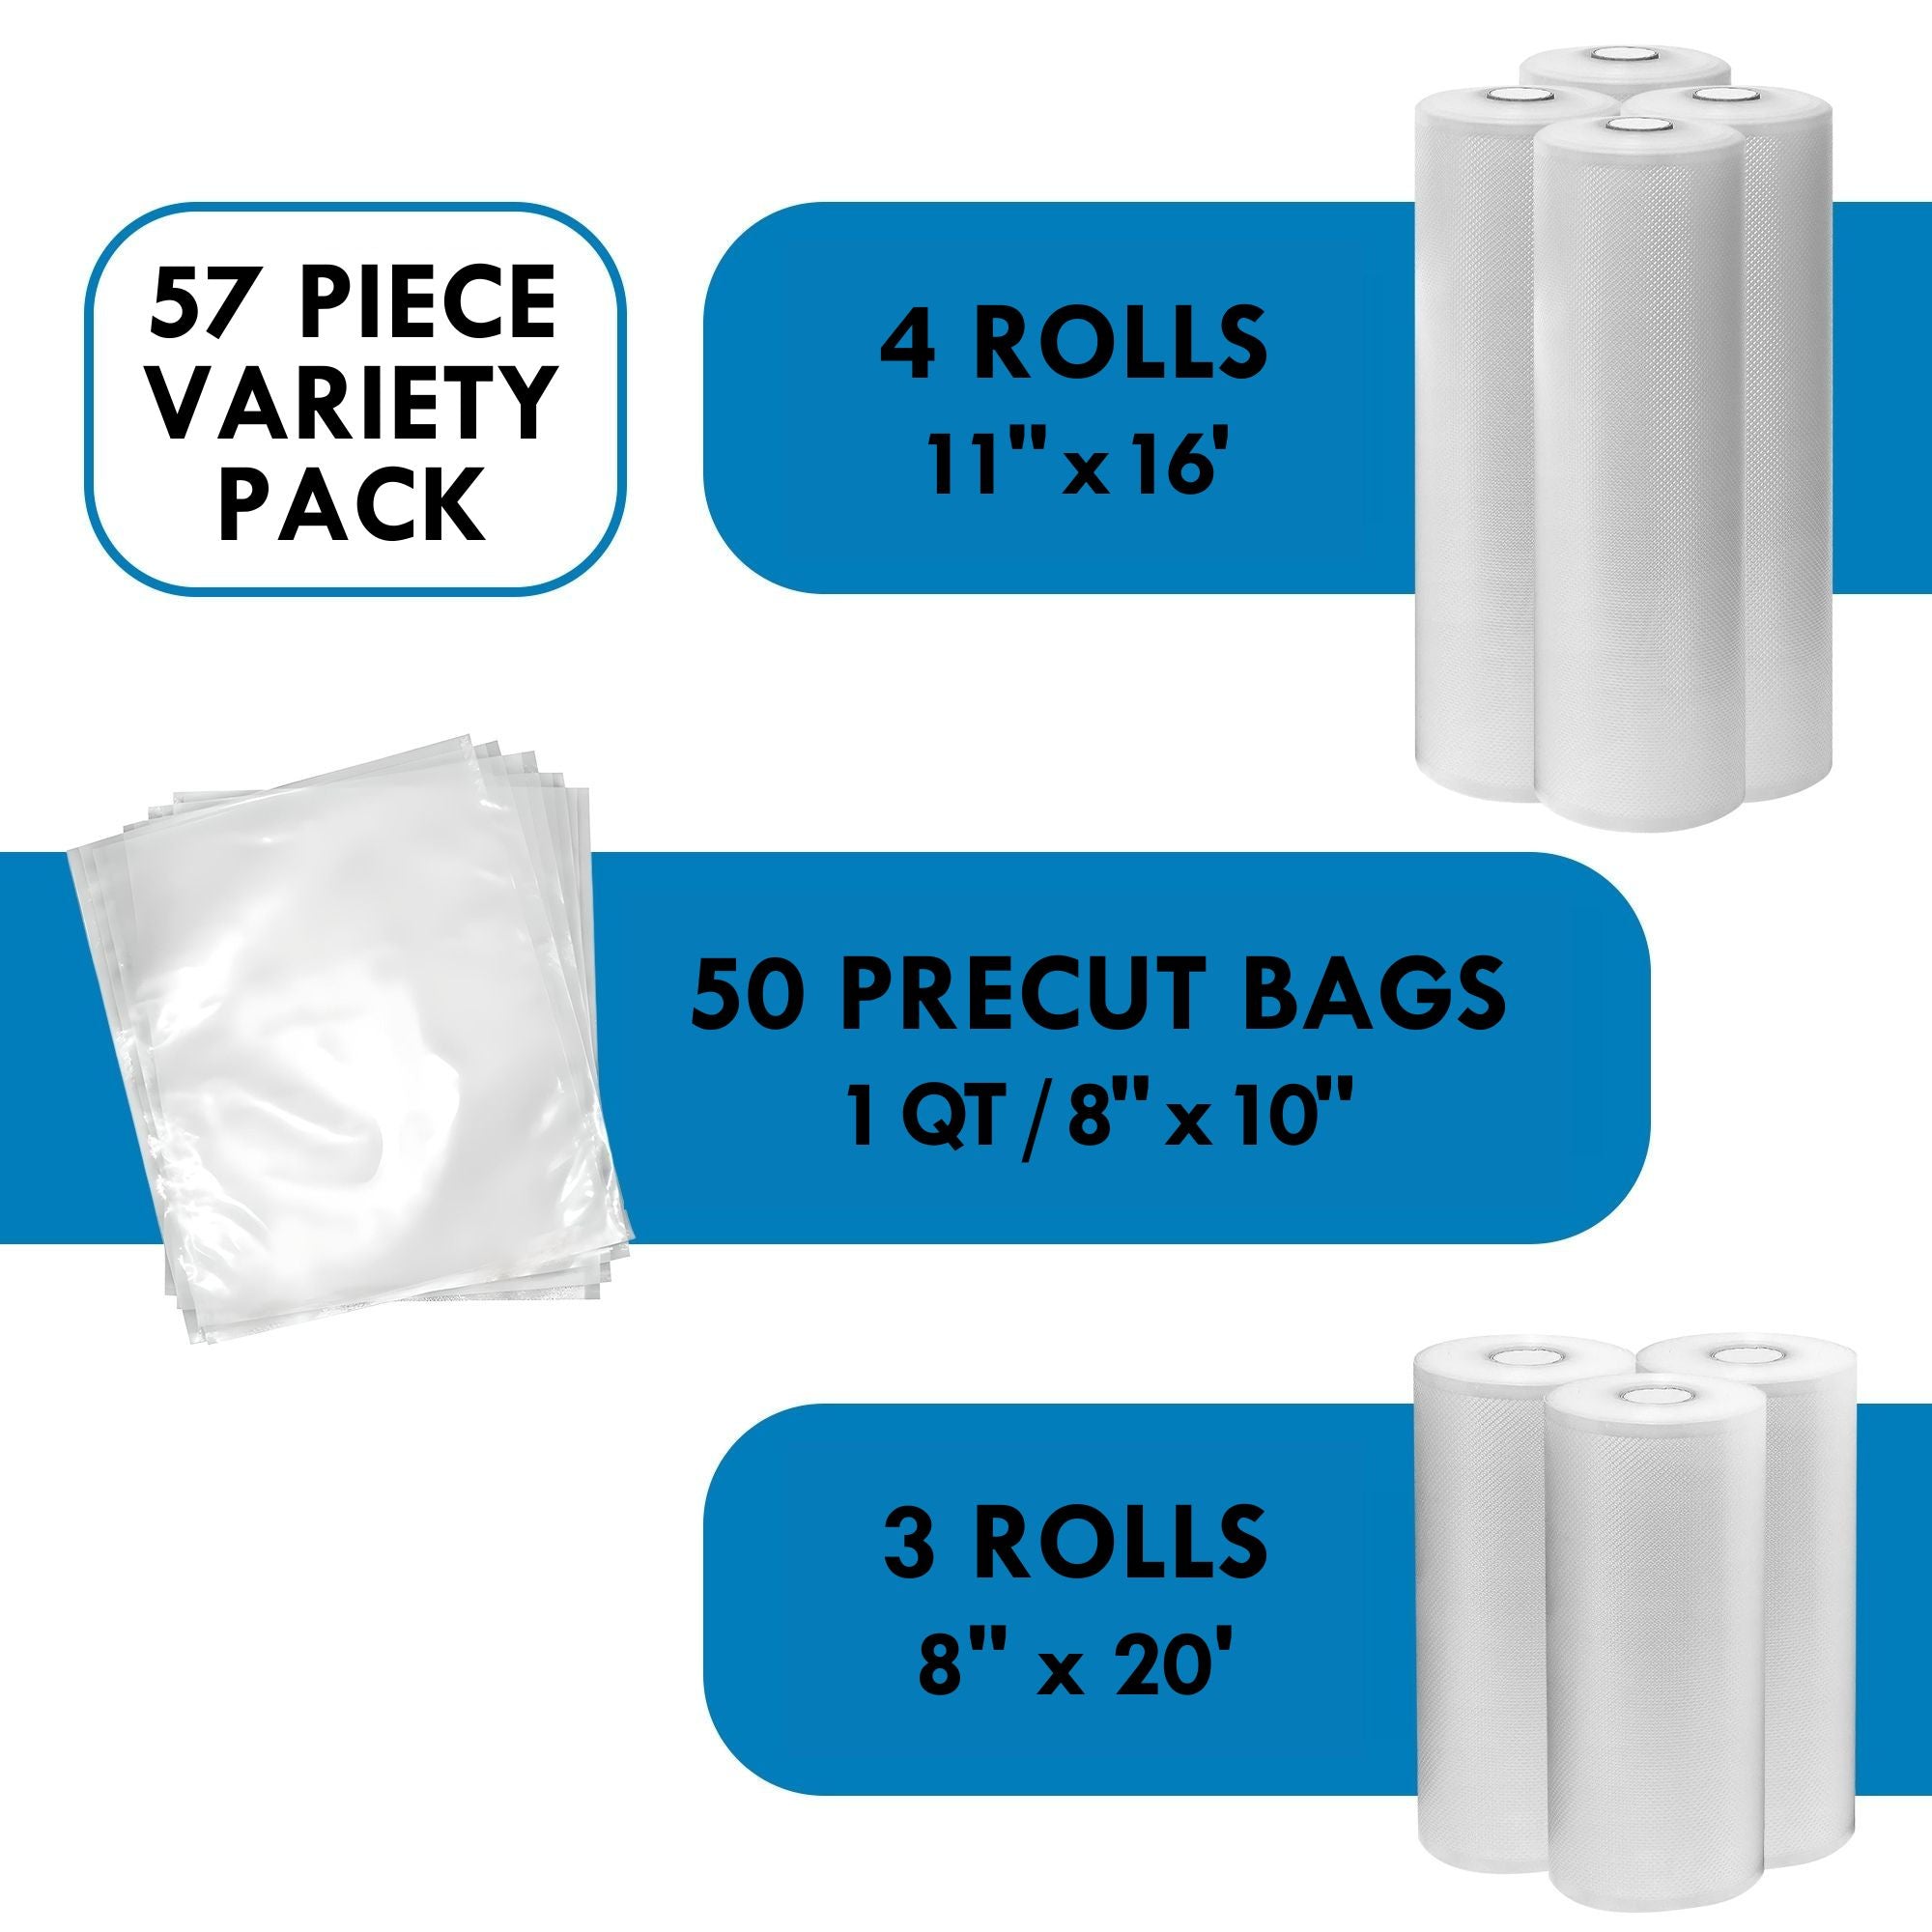 Four large rolls, 3 small rolls, and a pile of pre-cut bags from the Kenmore Kenmore vacuum sealer bag 57-piece assortment, labeled with their sizes